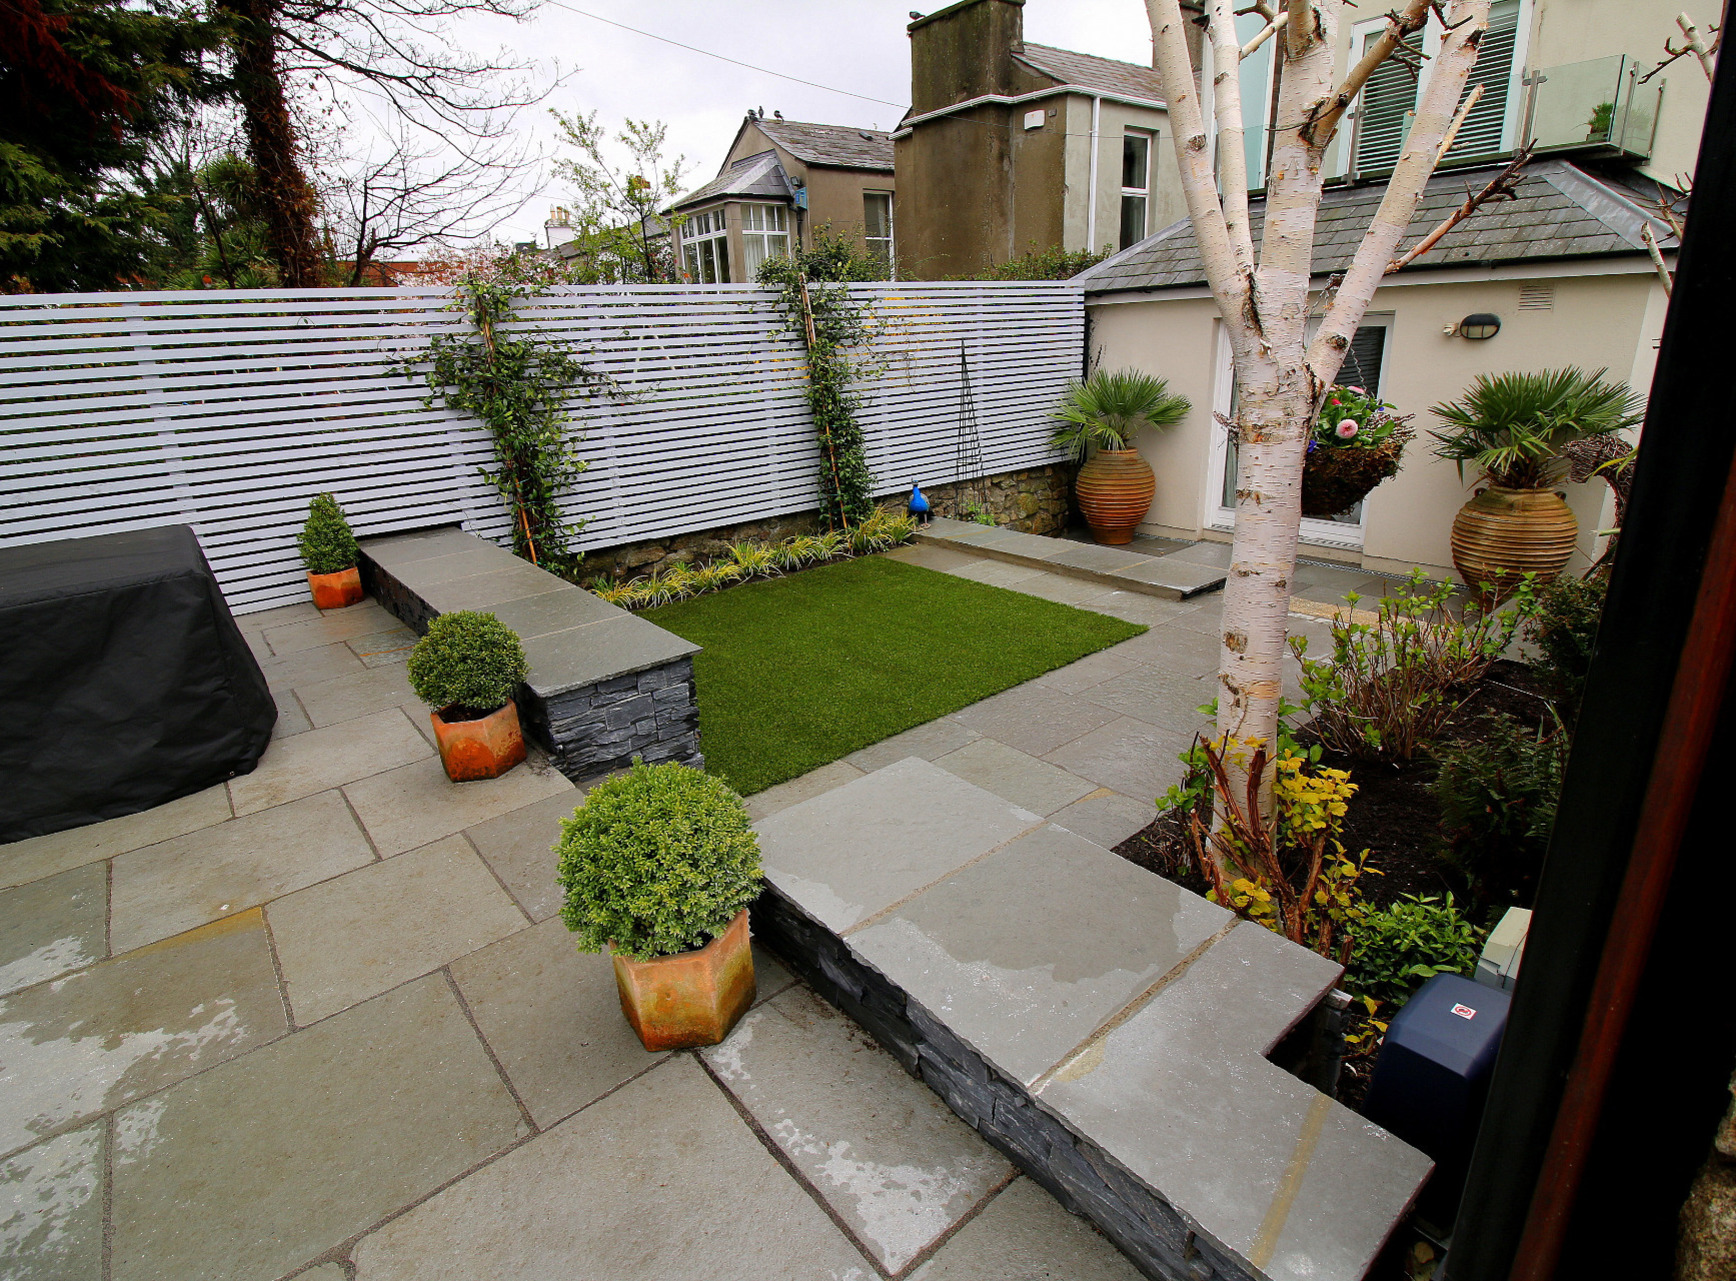 Slatted Timber Fencing with painted finish in Rathmines garden